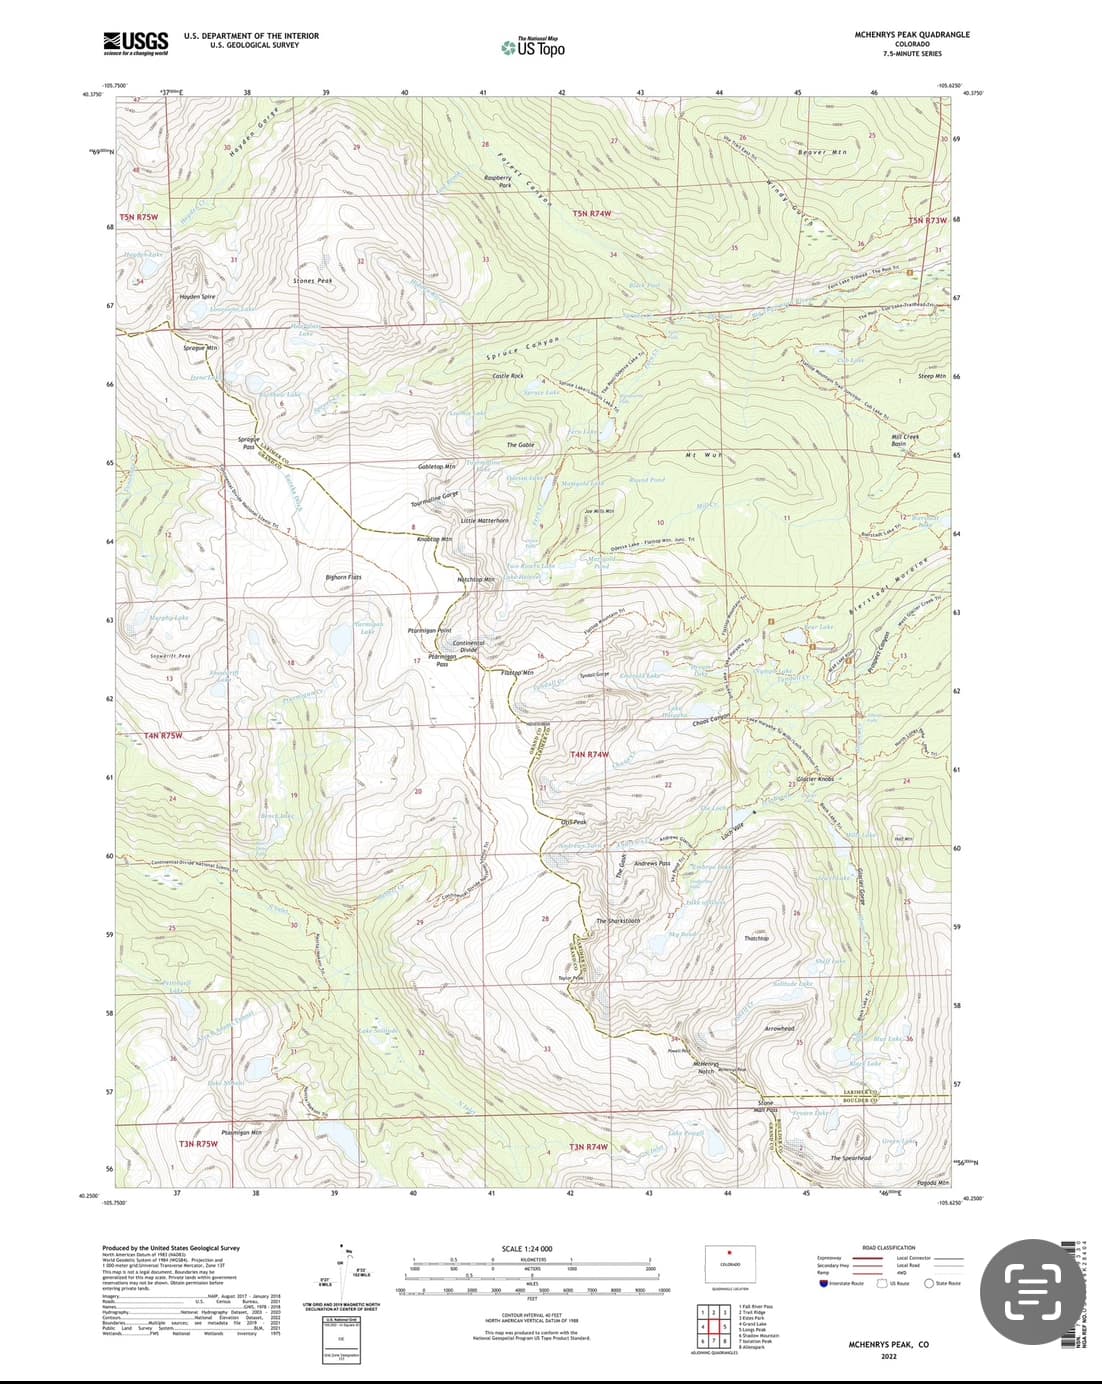 40.37%
40,2500
XUSGS
science for a changing world
-105.7500
63
58
57
T5N R75W
105.7500
U.S. DEPARTMENT OF THE INTERIOR
U.S. GEOLOGICAL SURVEY
Myphylake
Sedrift
$
T3N-R75W
Hayden Gorge
Parmigon Micr
Produced by the United States Geological Survey
the
1983
MENADE
World God
of 1984 Prejection and
T
generalized for this map scale. Pe lands we
be shown in perman before
Stones Peak
Bighorn Flats
104
DE
Gobletop Min
Ro
US Topo
Forest Canyon
Spruce Canyon
The Goble
SCALE 1:24 000
KILOMETER
TSN R74W
Joe
T4N R74W
Yeople
Ofis Prok
CONTOUR INTERVAL FEET
NORTH AMERICAN VERTICAL DATUM OF 1988
T3N R74W
7900
34
National Gel Program US Tope Product Standard
ME WUR
Lake Ft.Any. The
Andrews Pass
Brover Men
Windywi
Arrowhead
MCHENRYS PEAK QUADRANGLE
COLORADO
7.5-MINUTE SERIES
The Spearhead
0
TSN R73W 68
ierstadt Mersine
ROAD CLASSIFICATION
-105.6250
Local Connector
US Re
Pogoda M
MCHENRYS PEAK, CO
69
65
57
40.3750
+5600N
-105.4250-40.2500
State Re
00
€